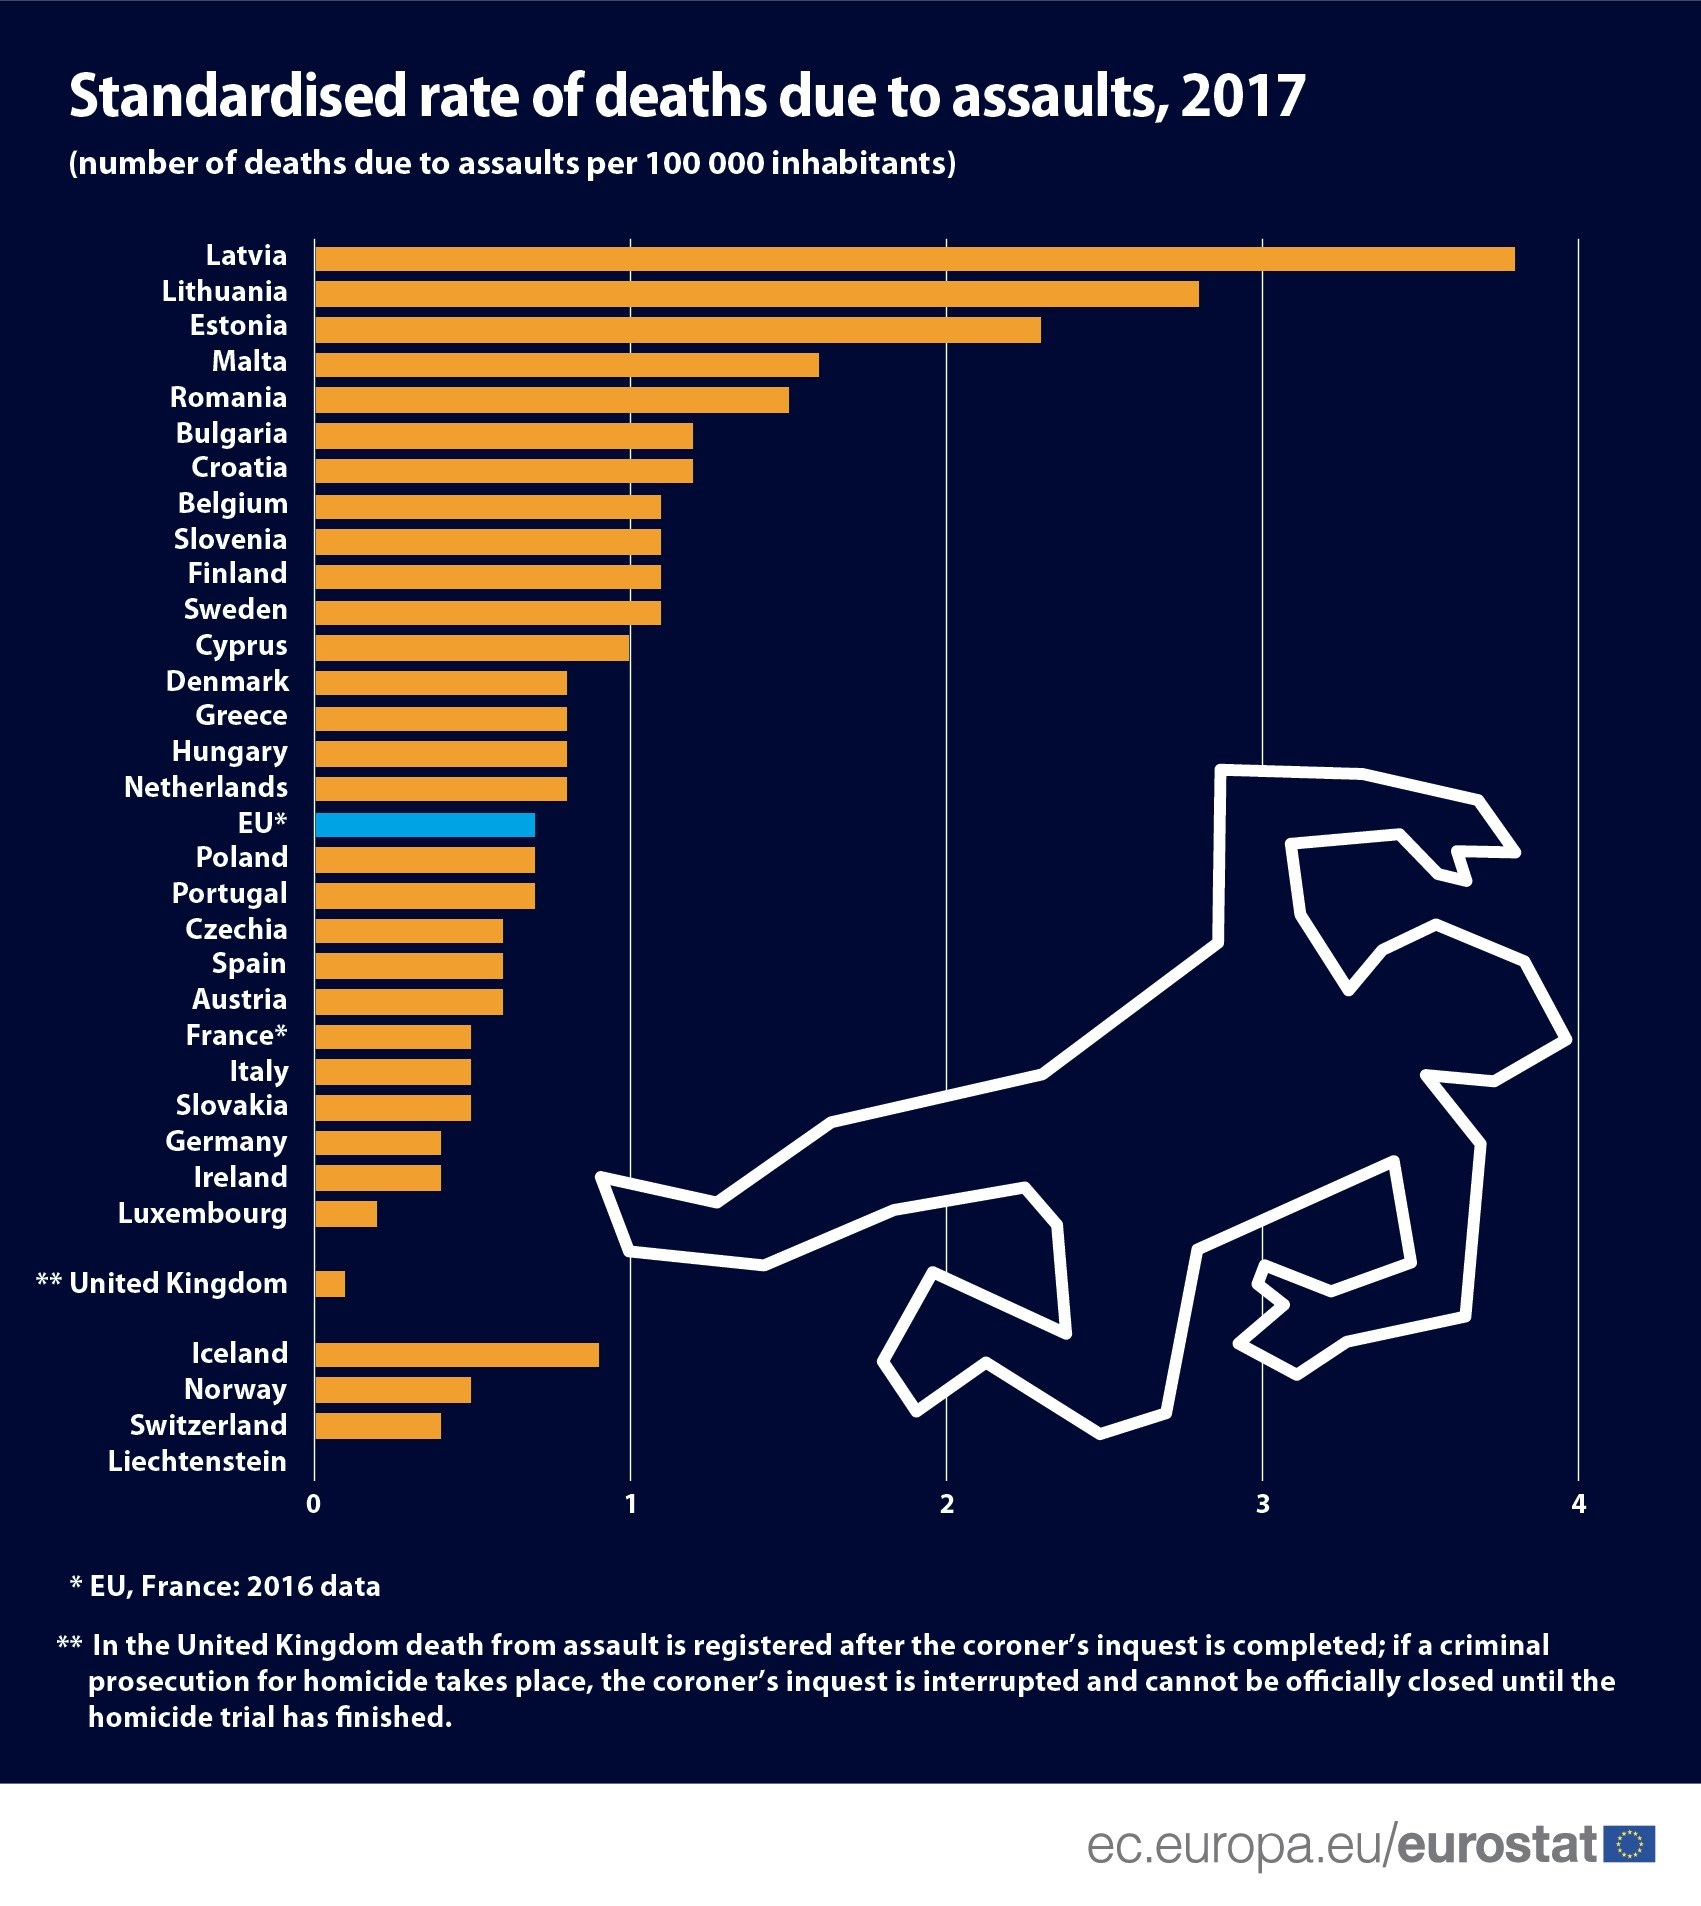 Deaths due to assaults in the EU, 2017